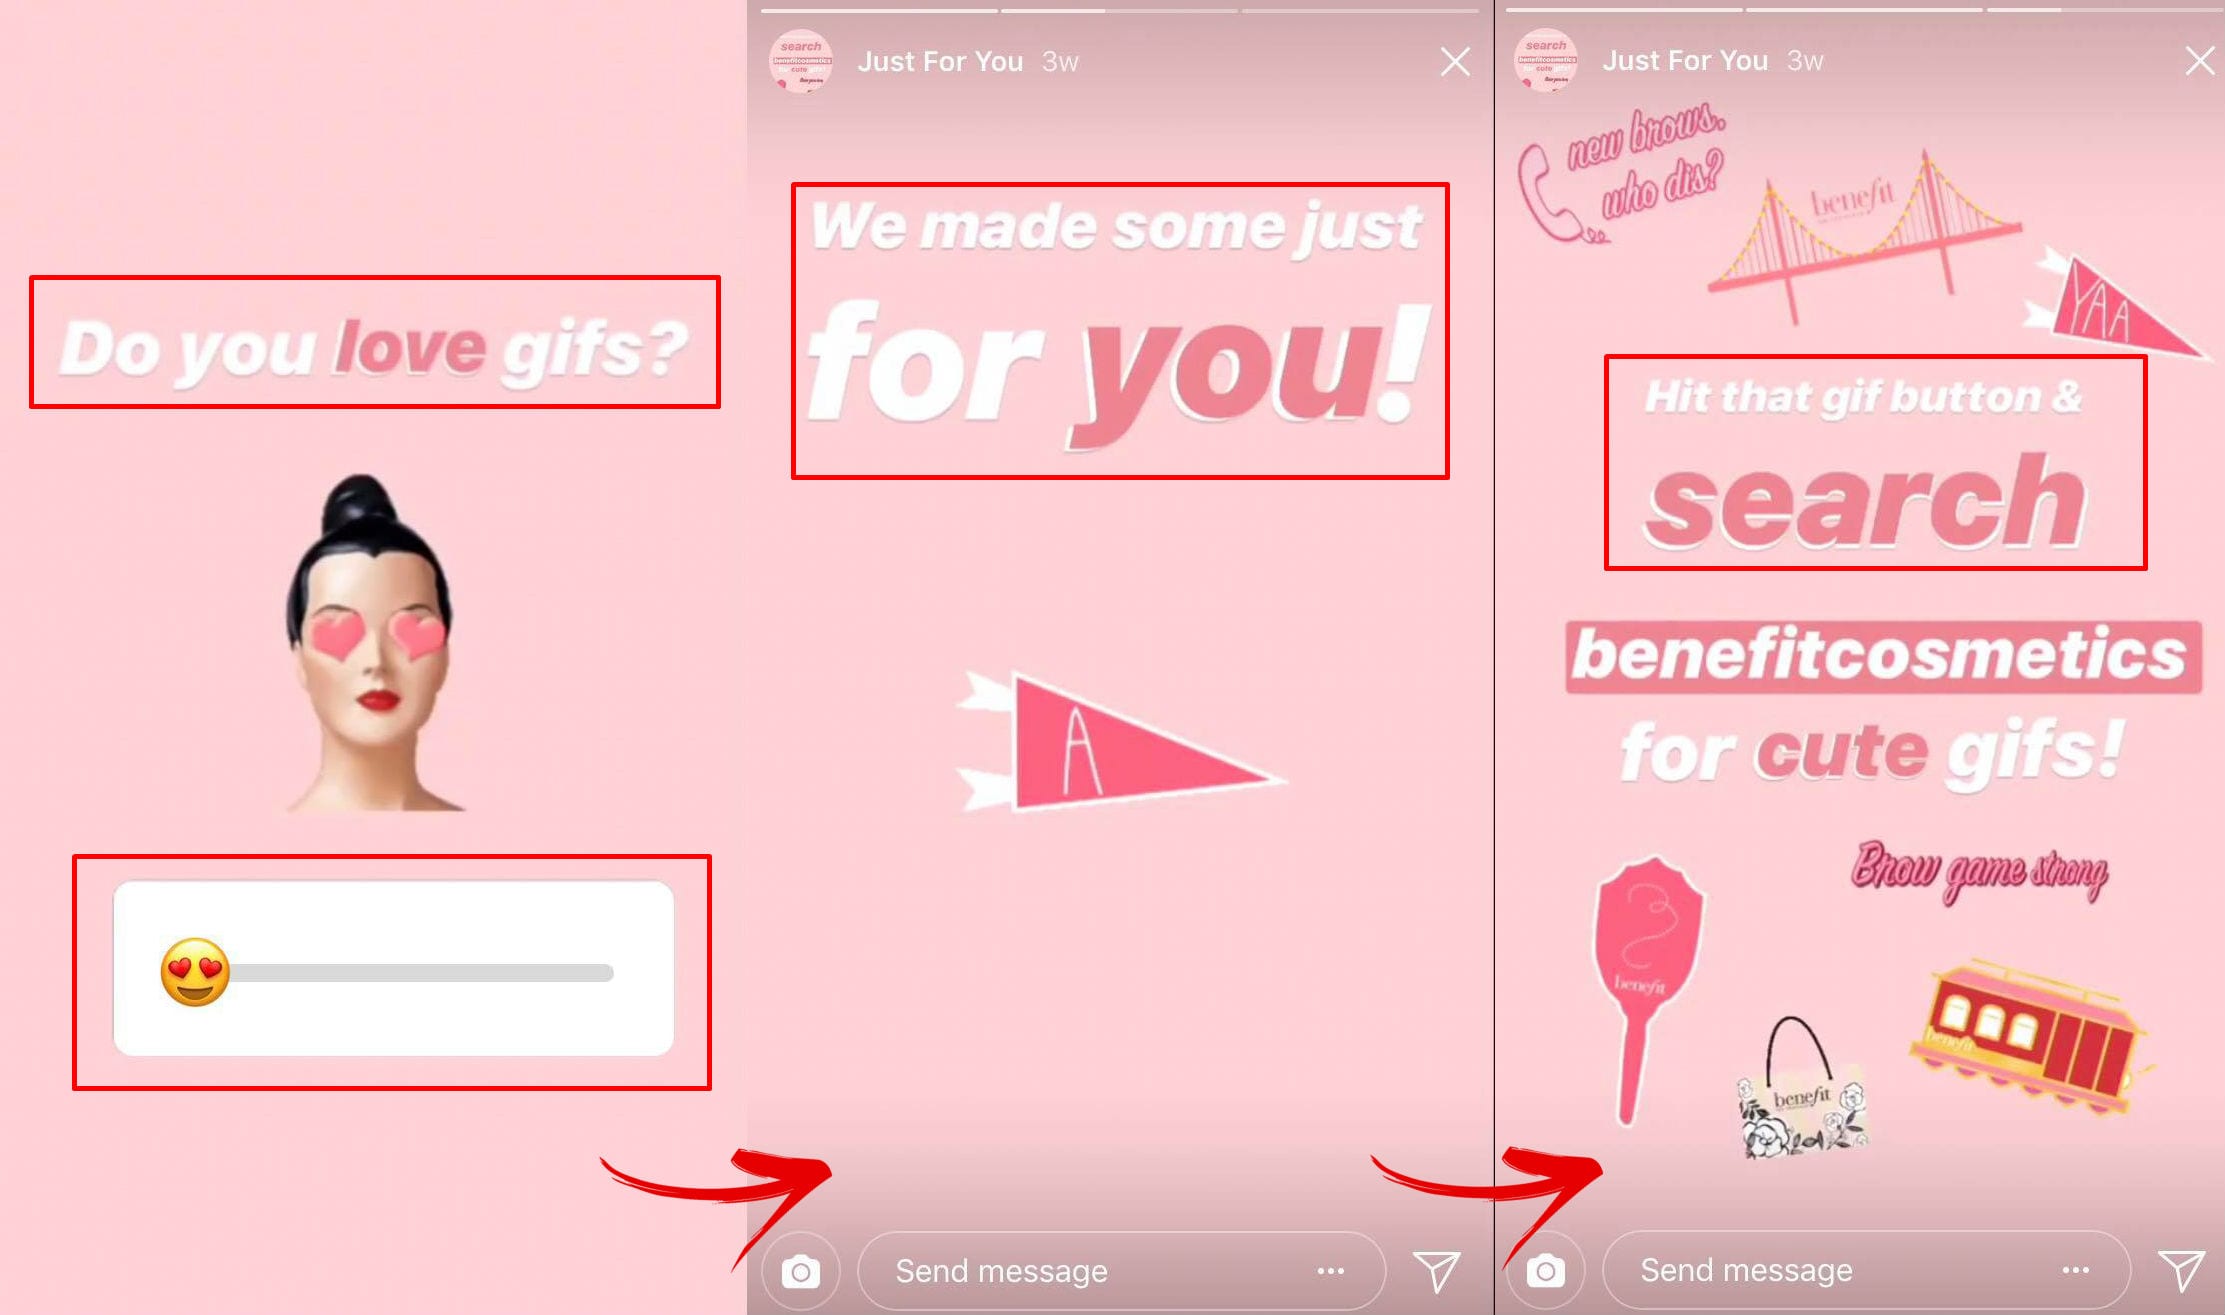 Smth useful benefits - Cracking Instagram's Code with Ephemeral Content